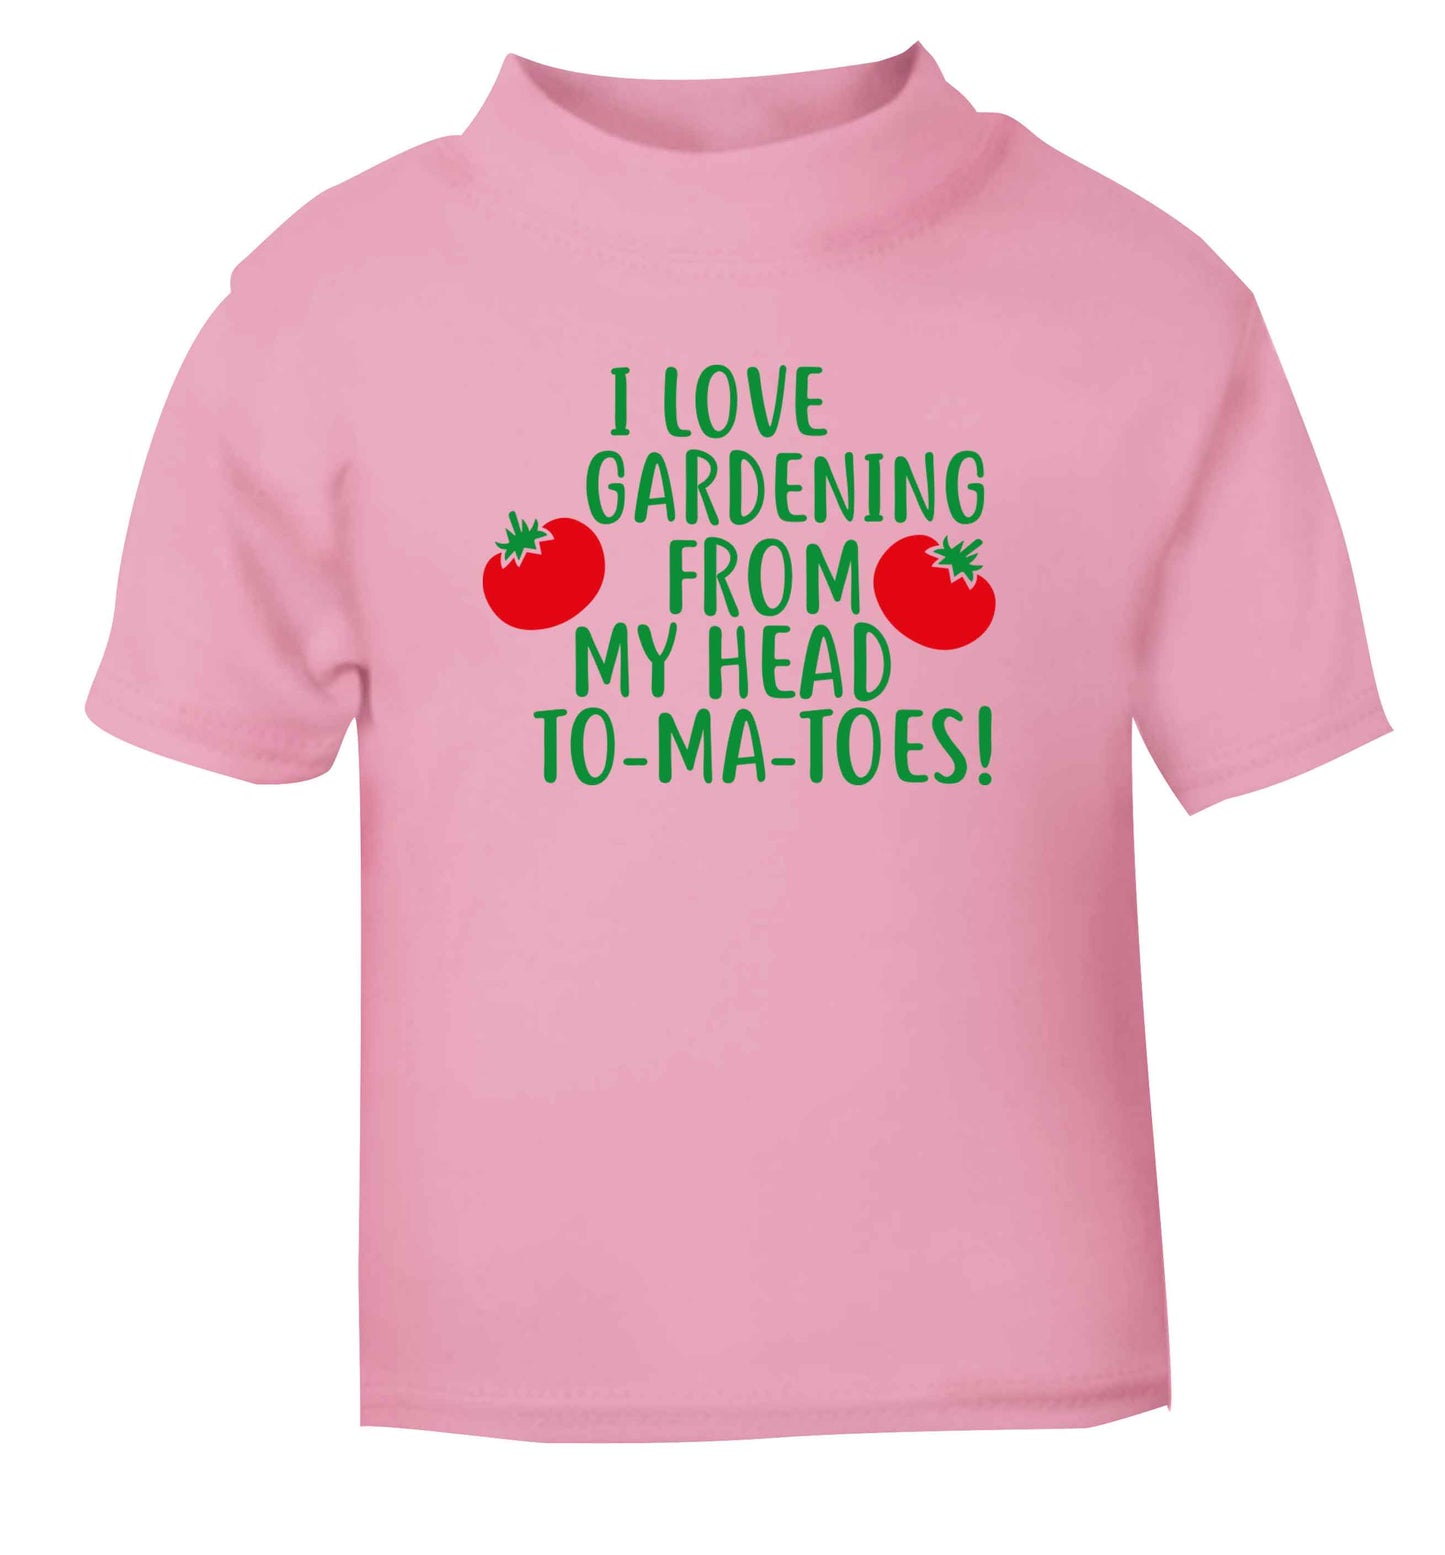 I love gardening from my head to-ma-toes light pink Baby Toddler Tshirt 2 Years